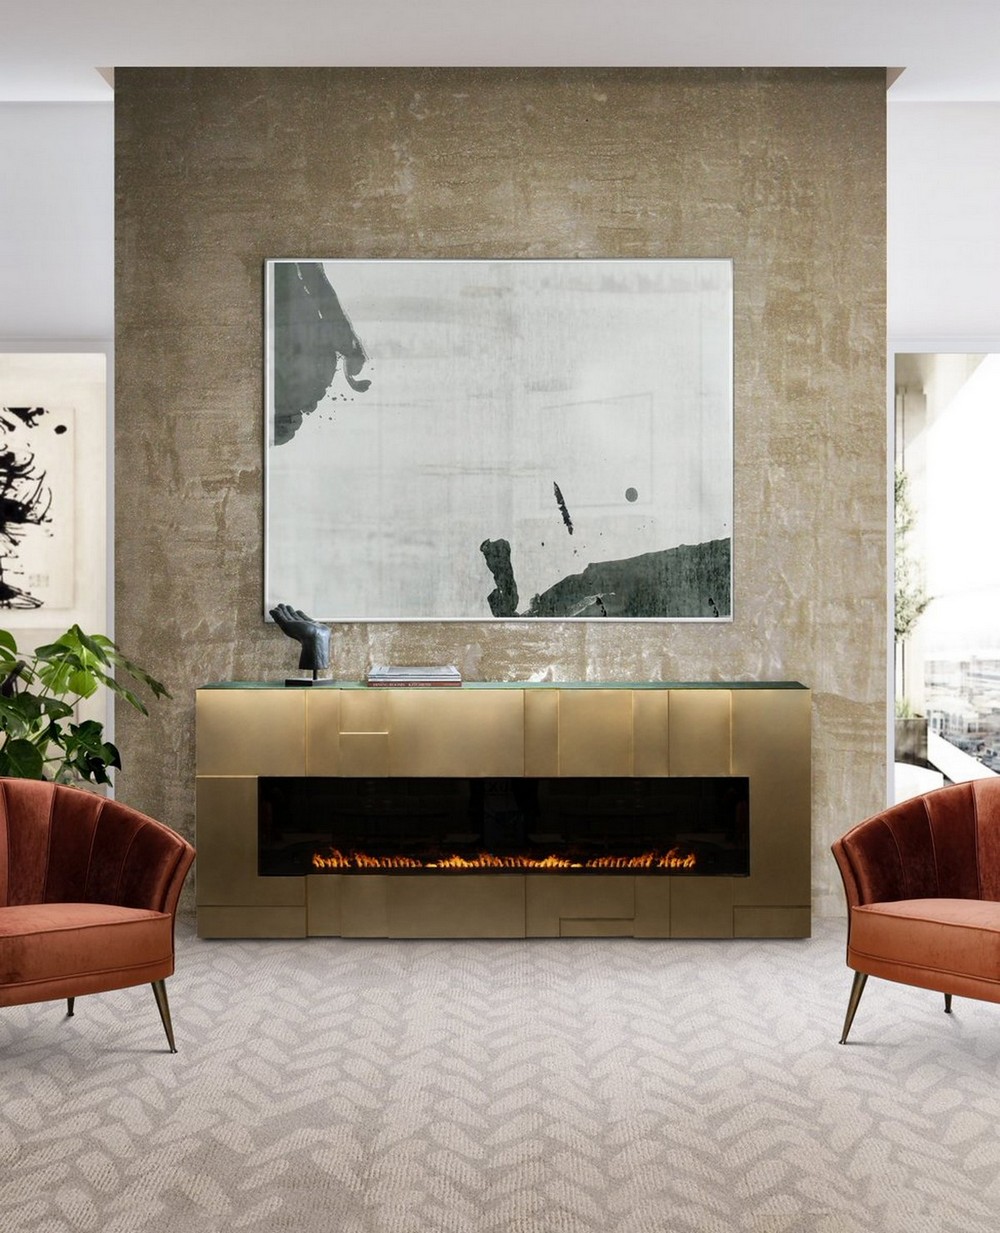 Keep It Warm and Cozy: Contemporary Fireplace Ideas For This Winter